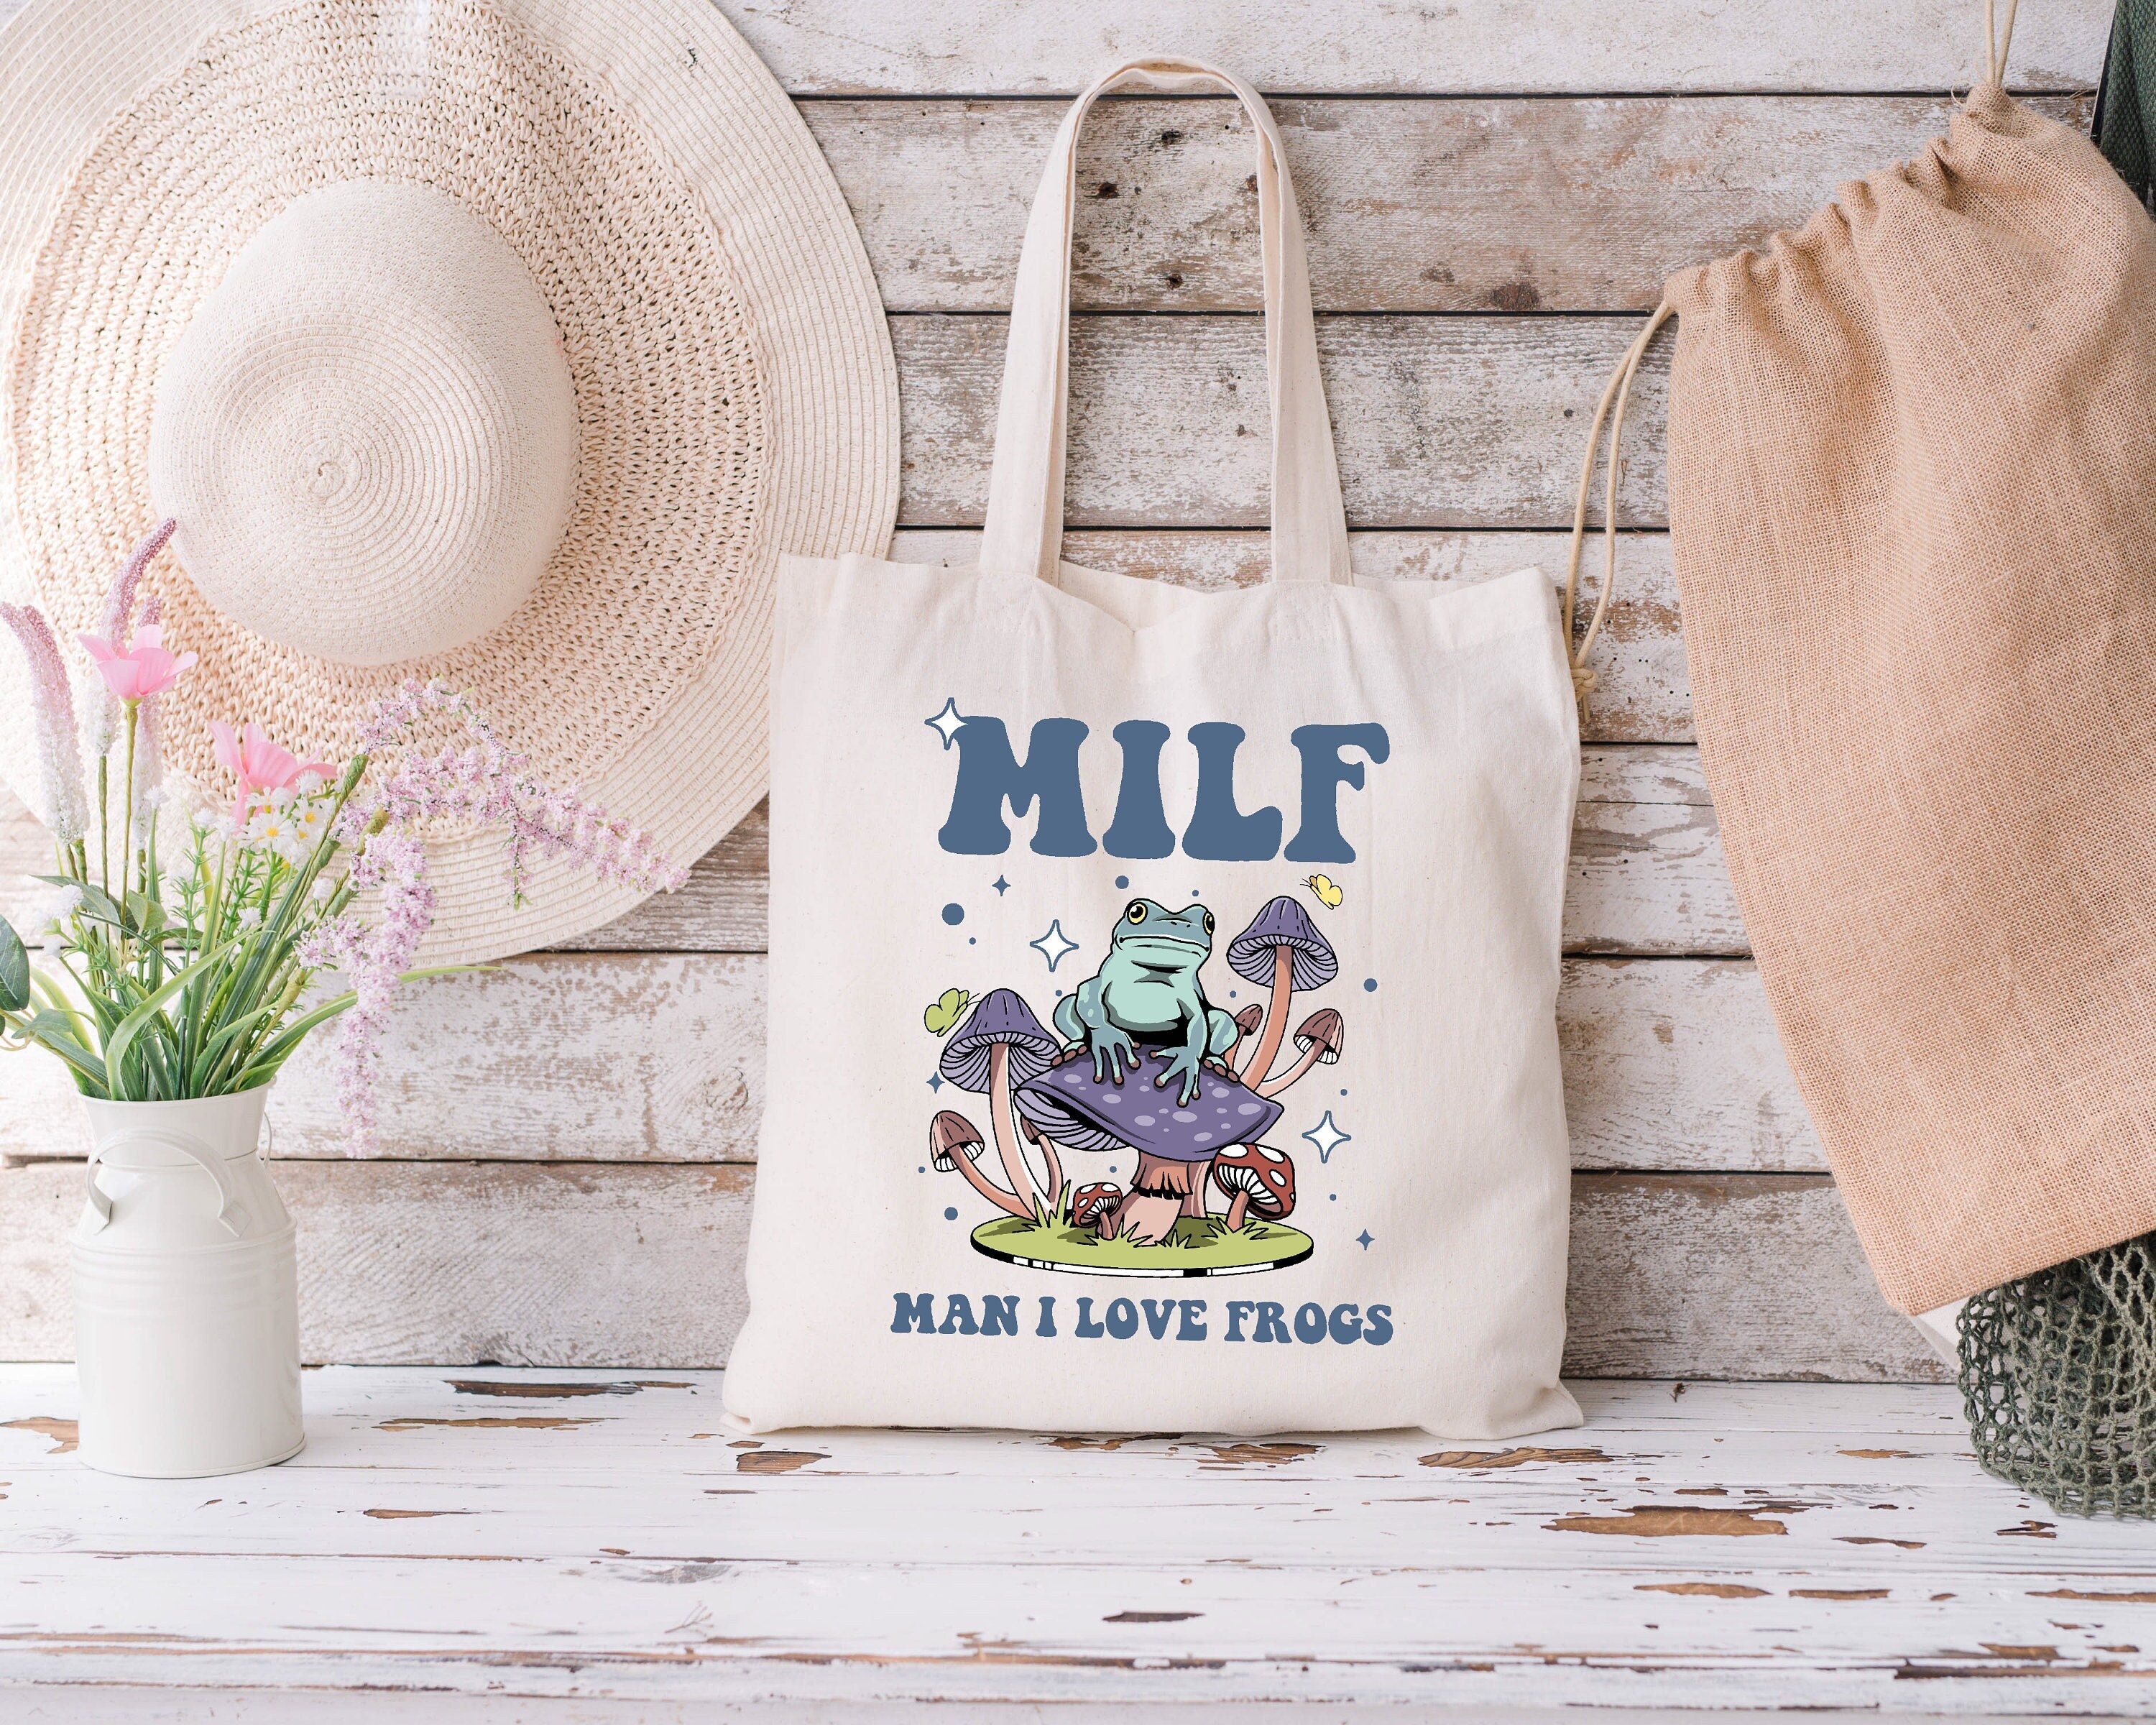 THEYGE Mushroom Tote Bag Aesthetic Vintage Tote Bag for Women Cute Funny  Tote Bag Cotton Mushroom Ca…See more THEYGE Mushroom Tote Bag Aesthetic